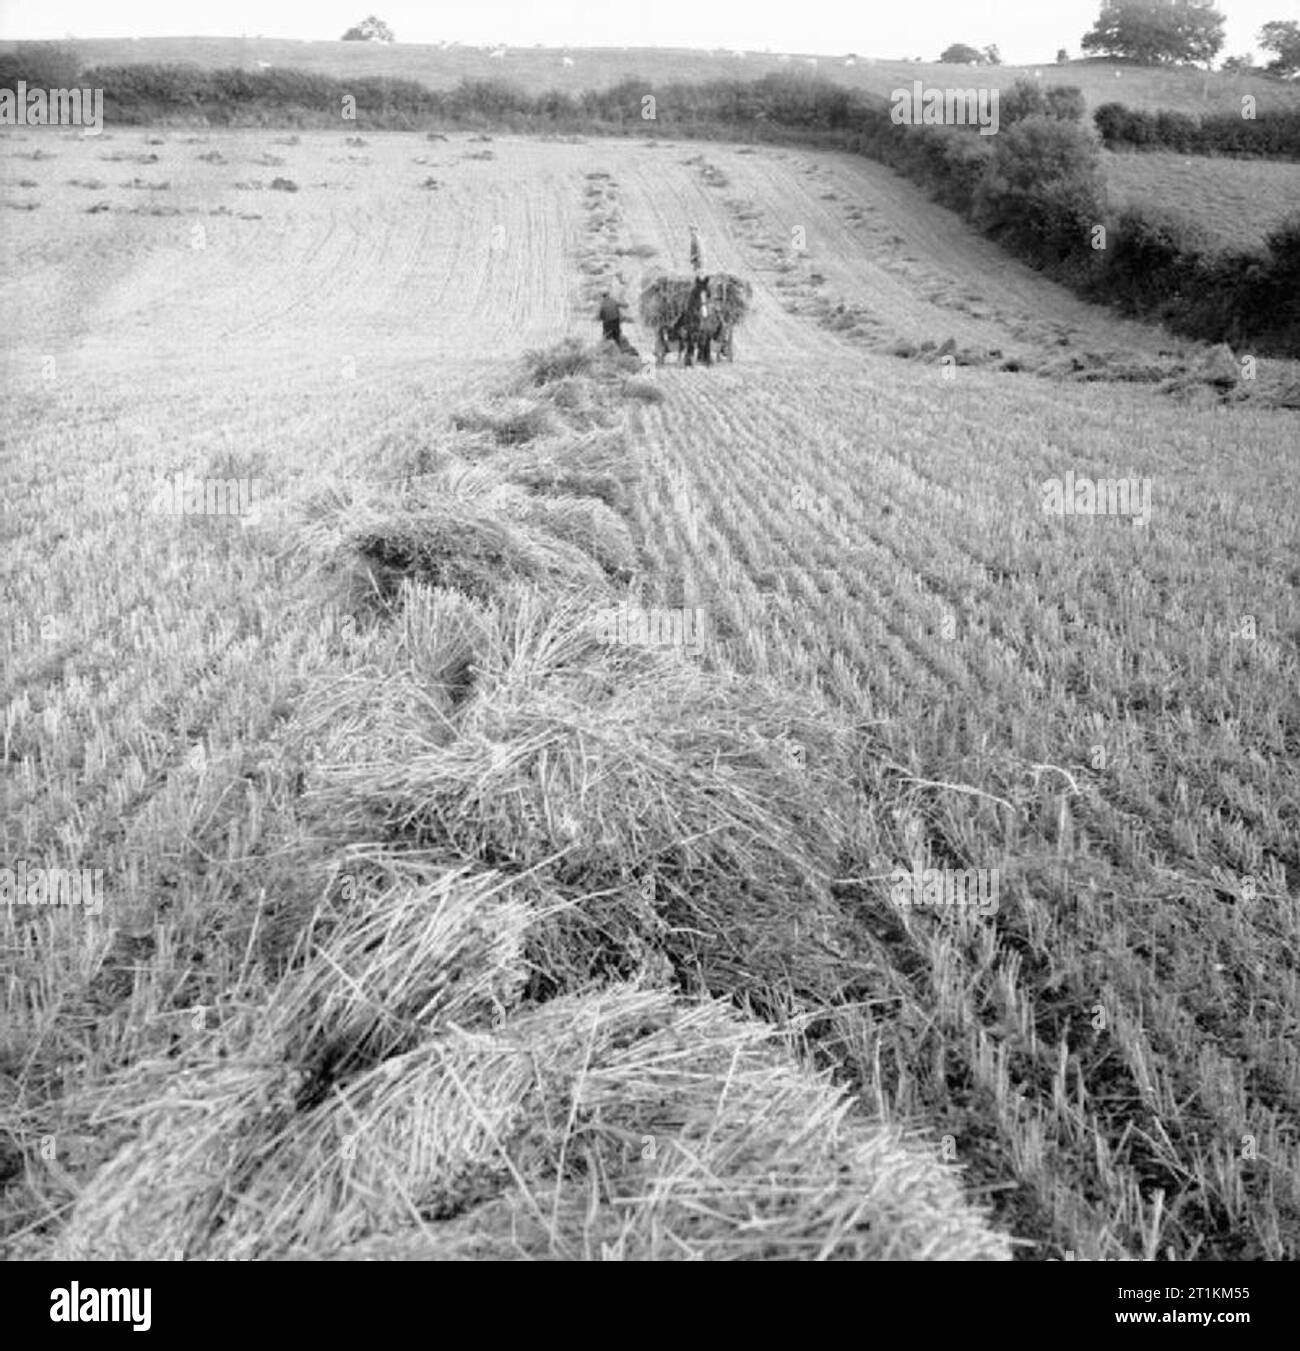 Harvesting at Mount Barton, Devon, England, 1942 Rows of corn stooks stretch across this field into the distance, waiting to be collected by the already well-laden horse-drawn hay cart that is making its way slowly towards the camera in the late evening sun. This photograph was probably taken at Hollow Moor, Devon. Stock Photo